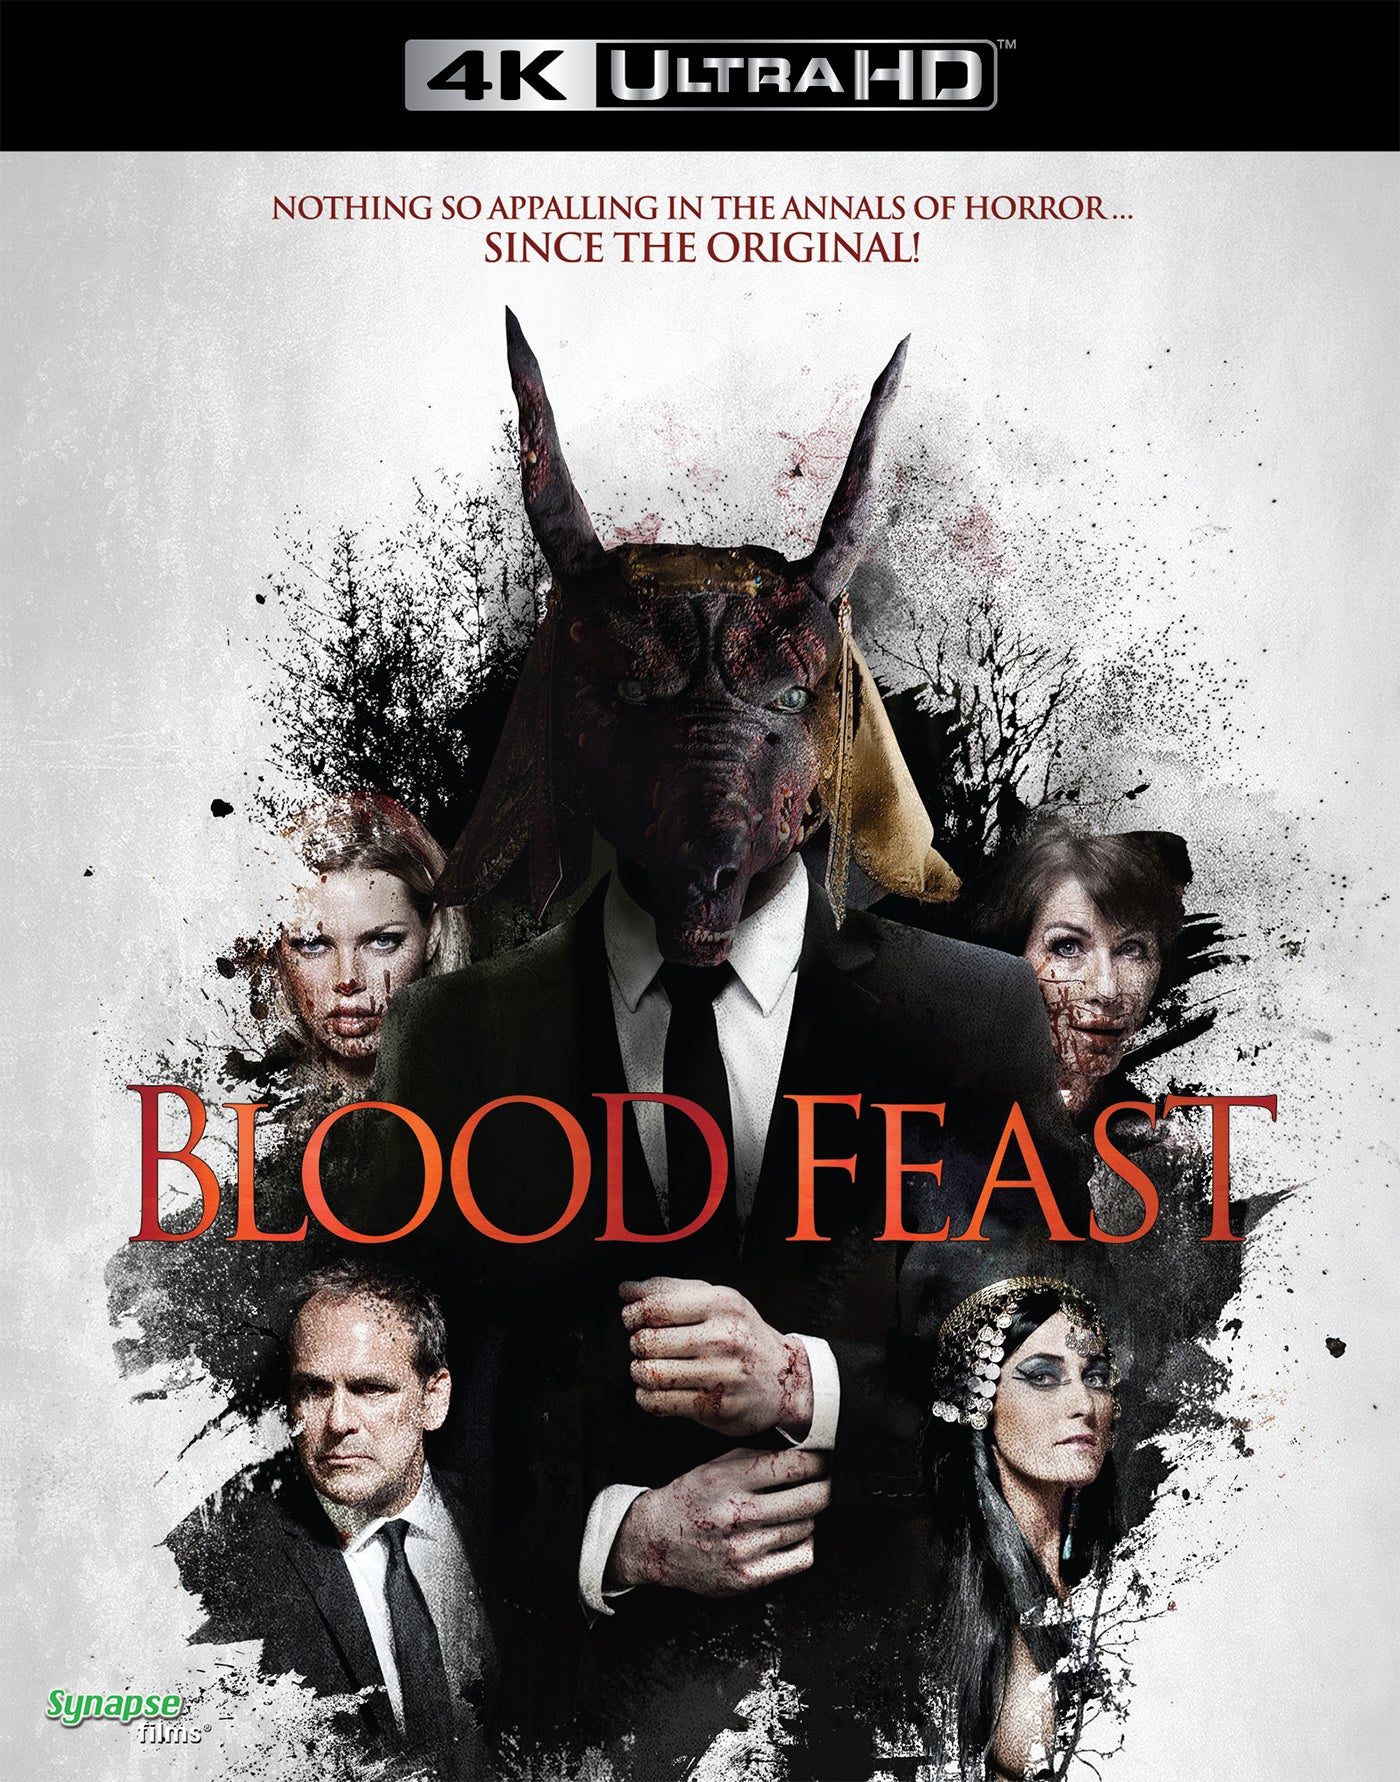 Blood Feast (2016) 4K UHD with Slipcover (Synapse Films)